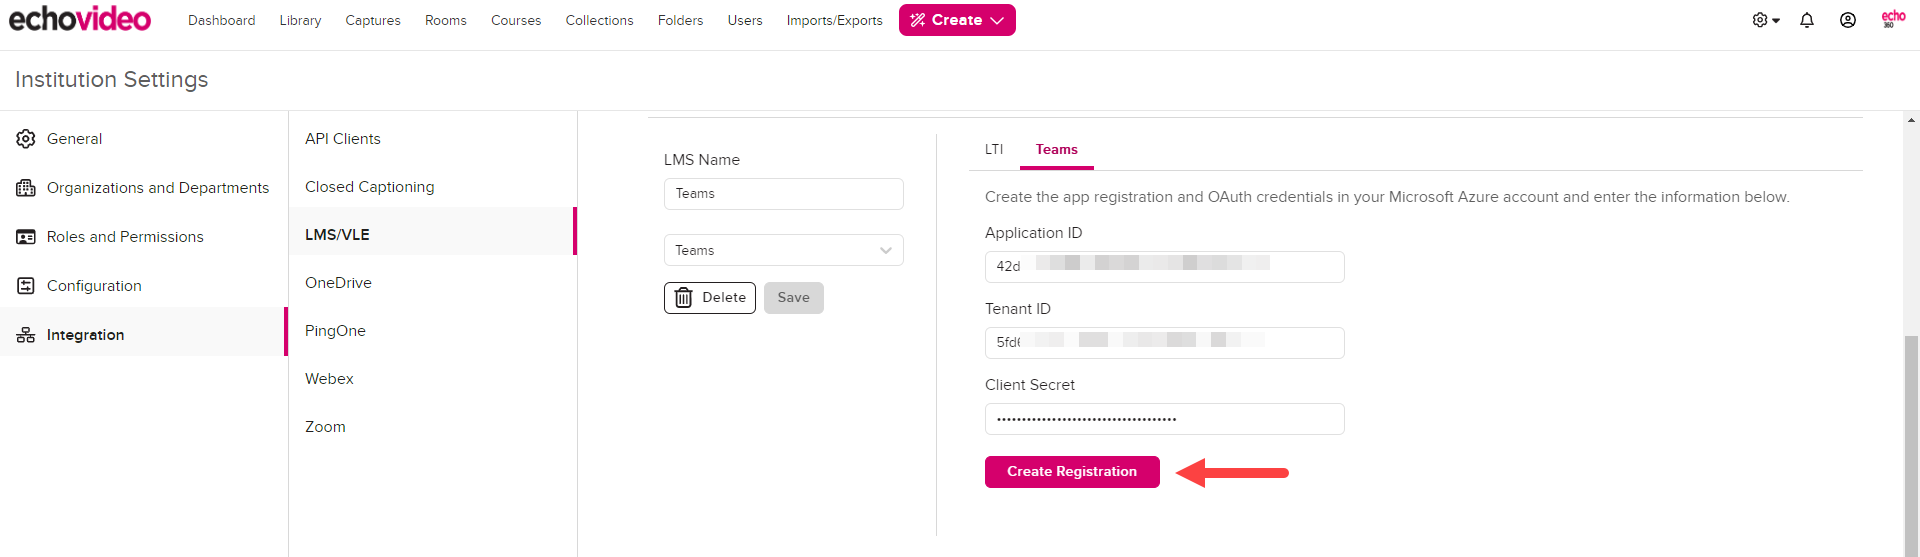 Teams configuration block in EchoVideo with all values completed and Create Registration button identified as described